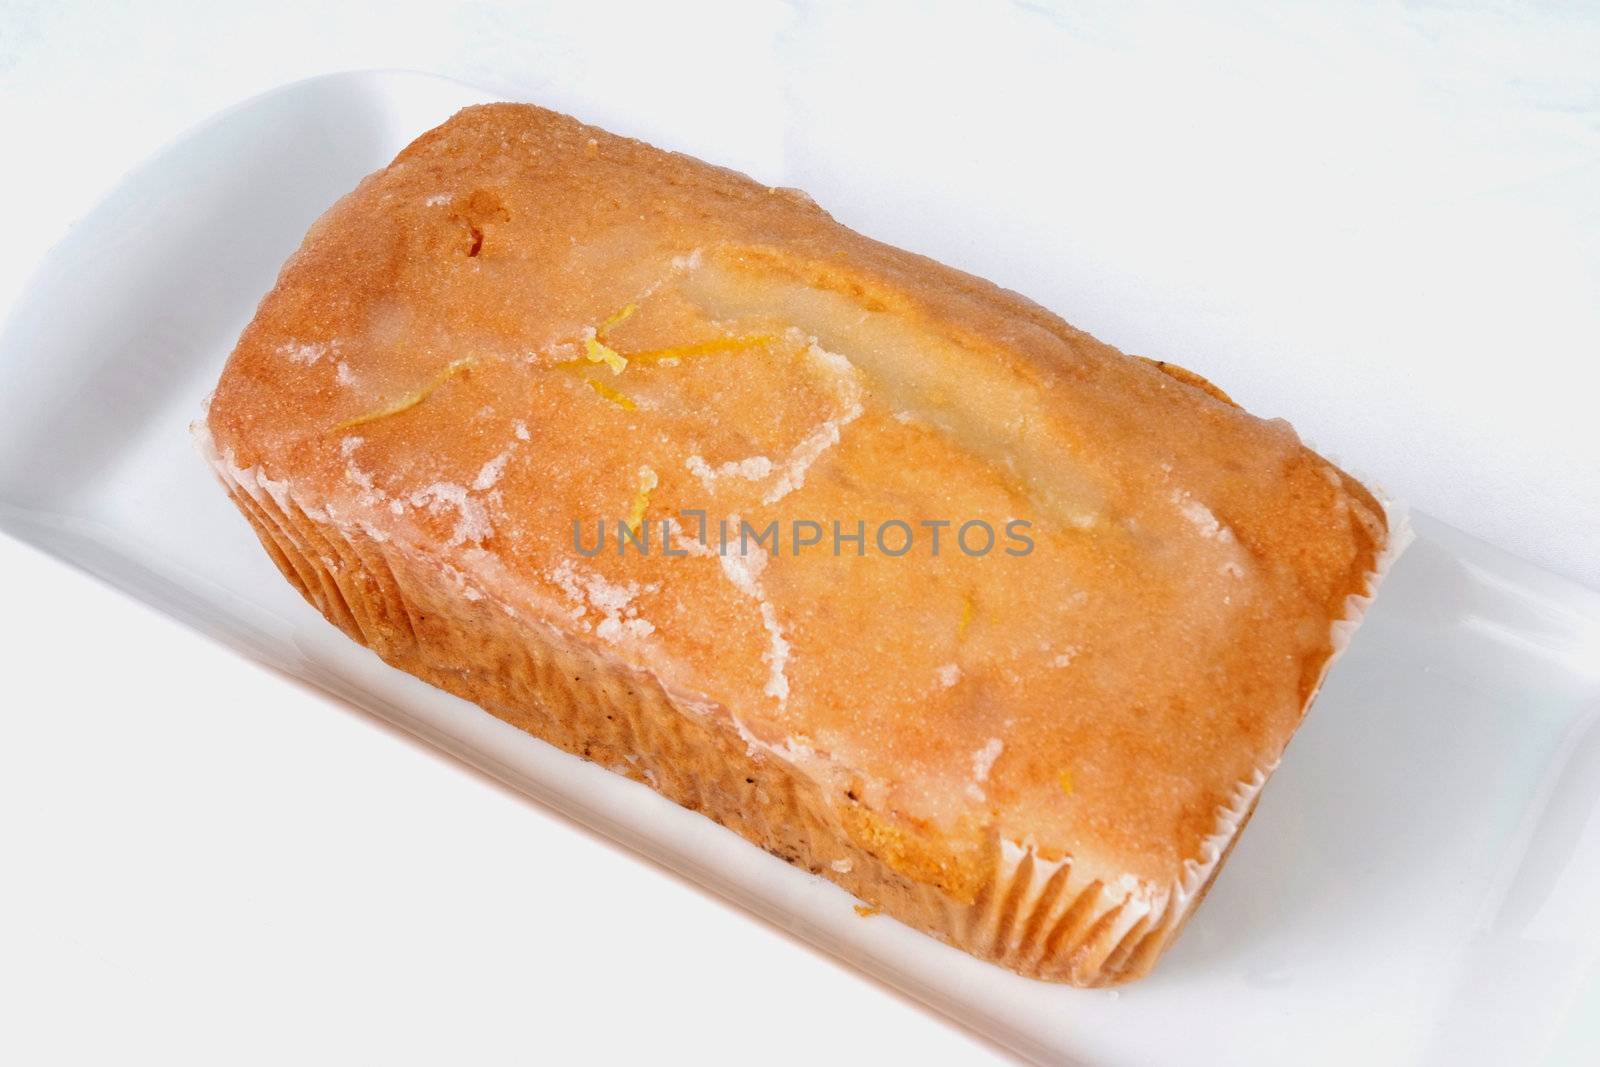 Mass-produced catering trade cake on a white background